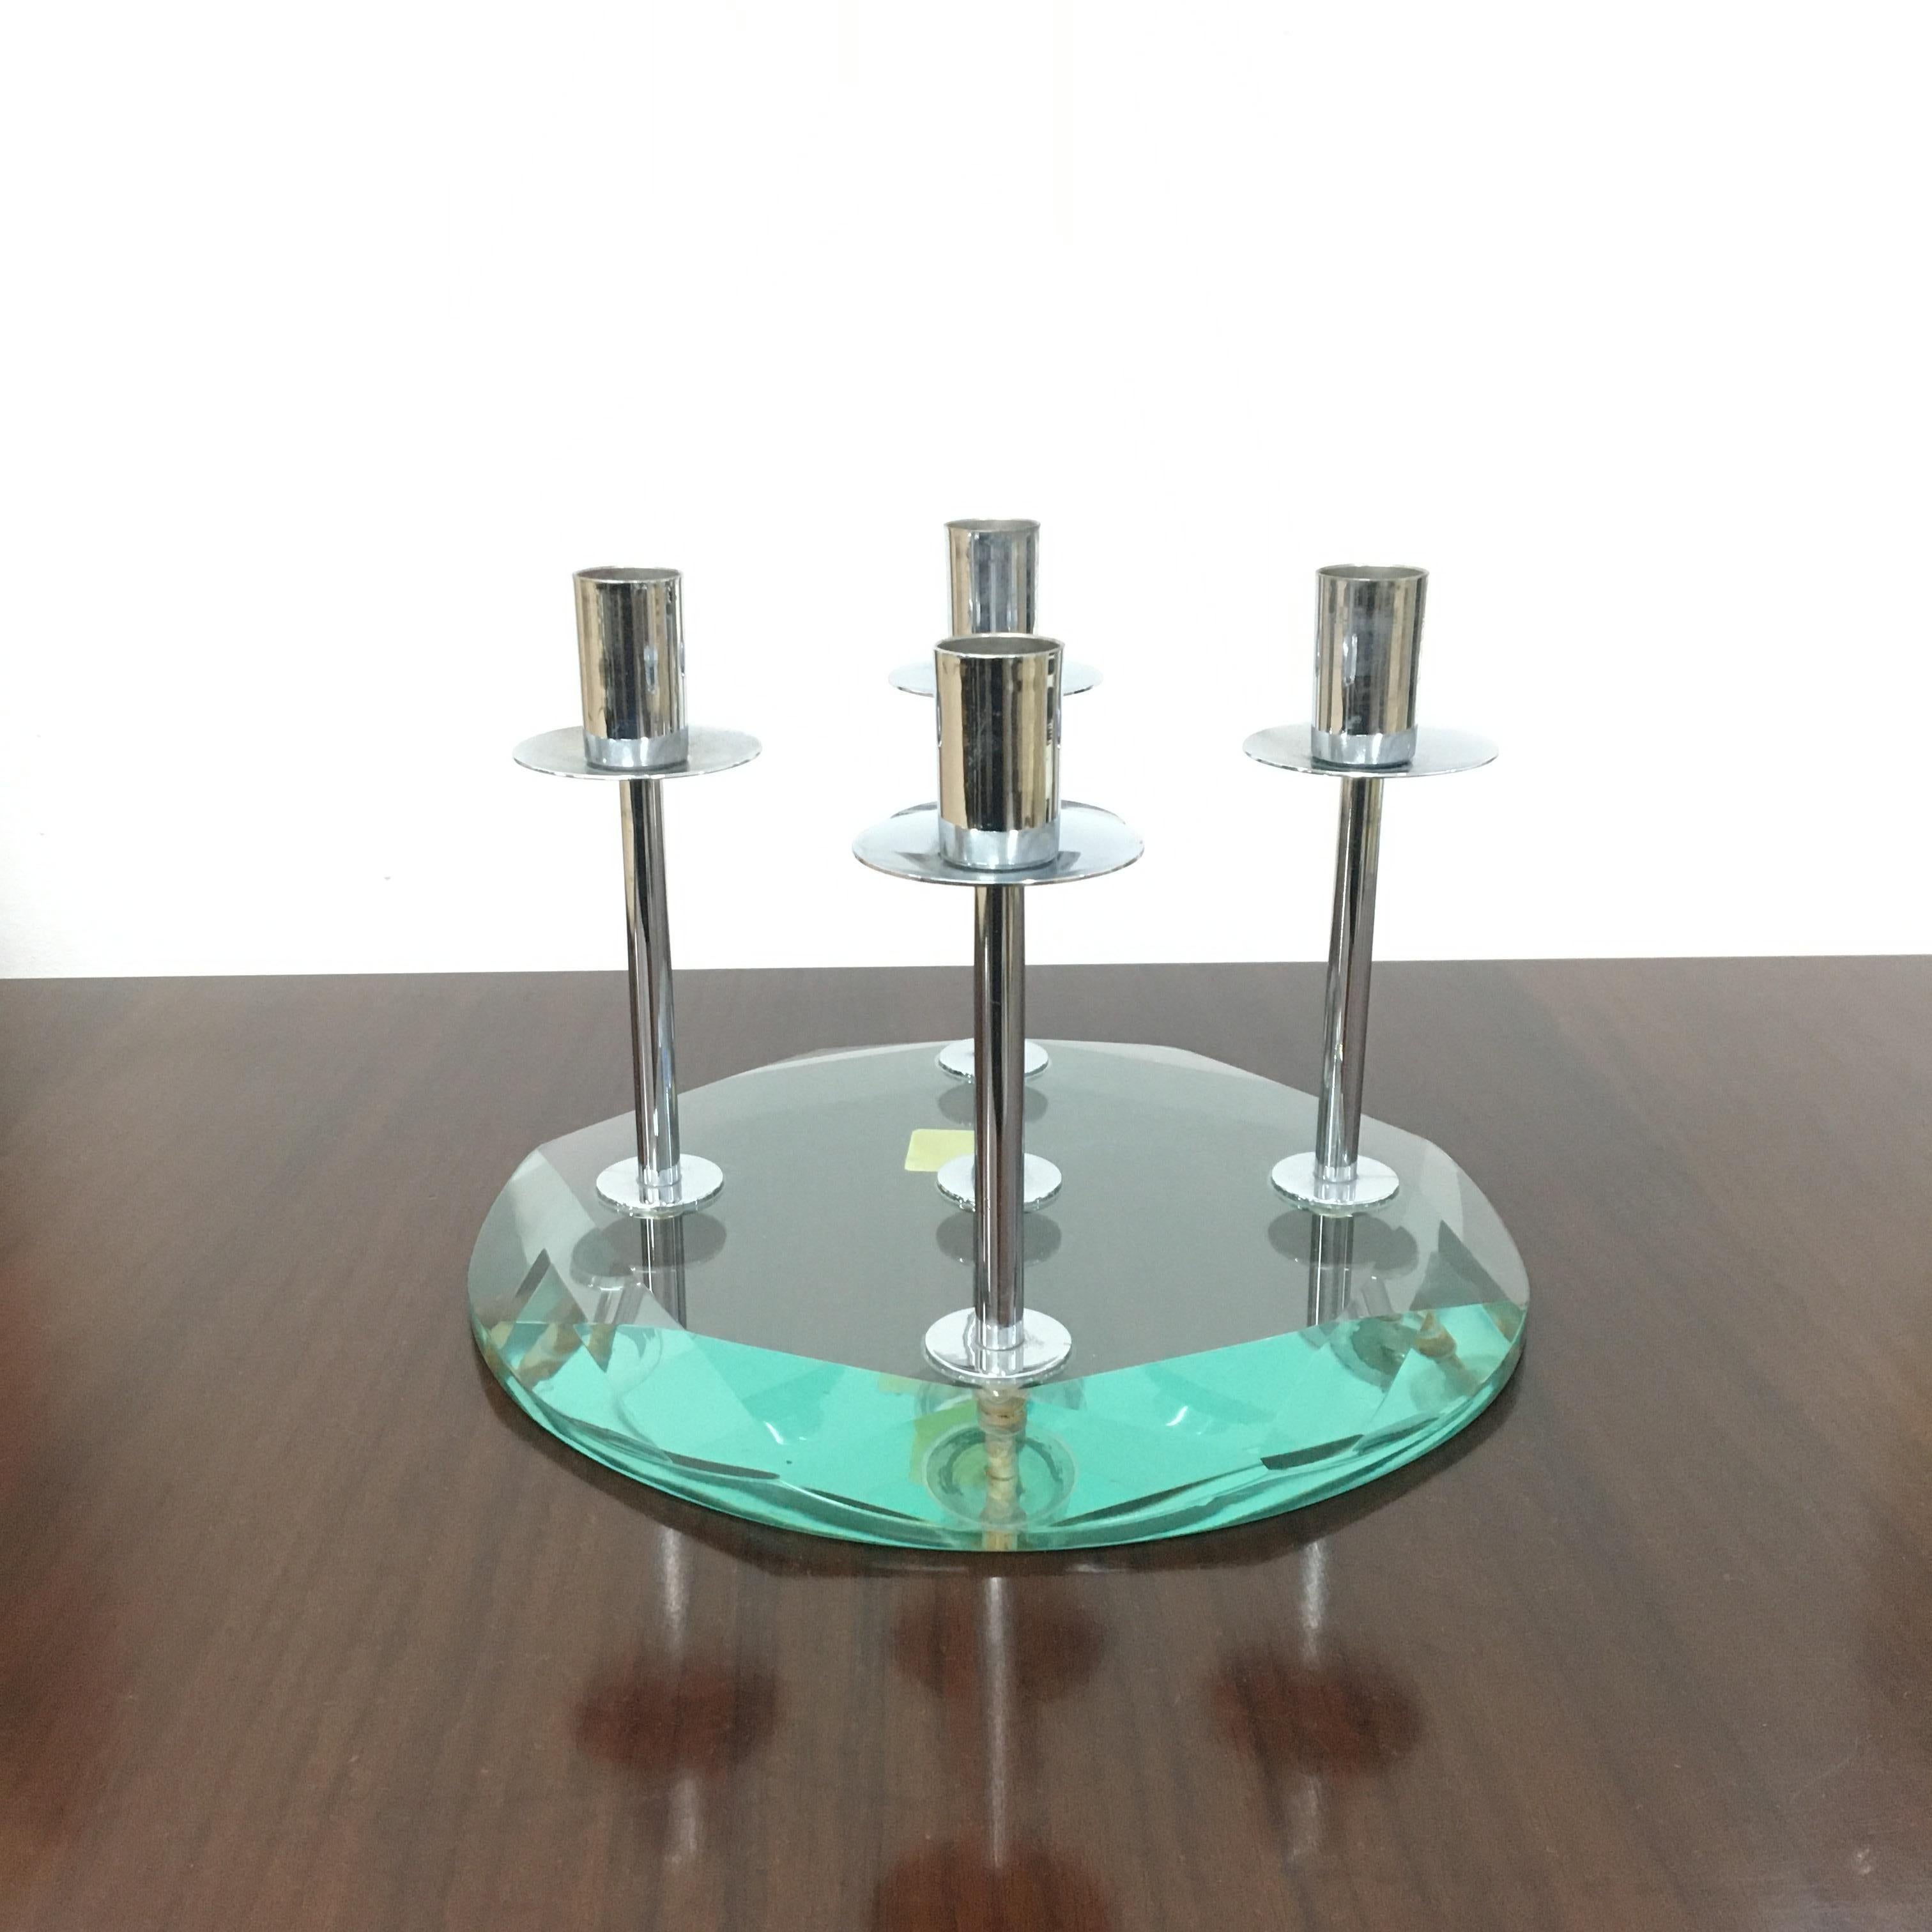 Prestigious candelabra in very thick faceted glass, Nile green color, with five candle holders in chromed metal. By Fontana Arte, 1960s, Italy. Jewelry label on the bottom.
Wear consistent with age and use.
 